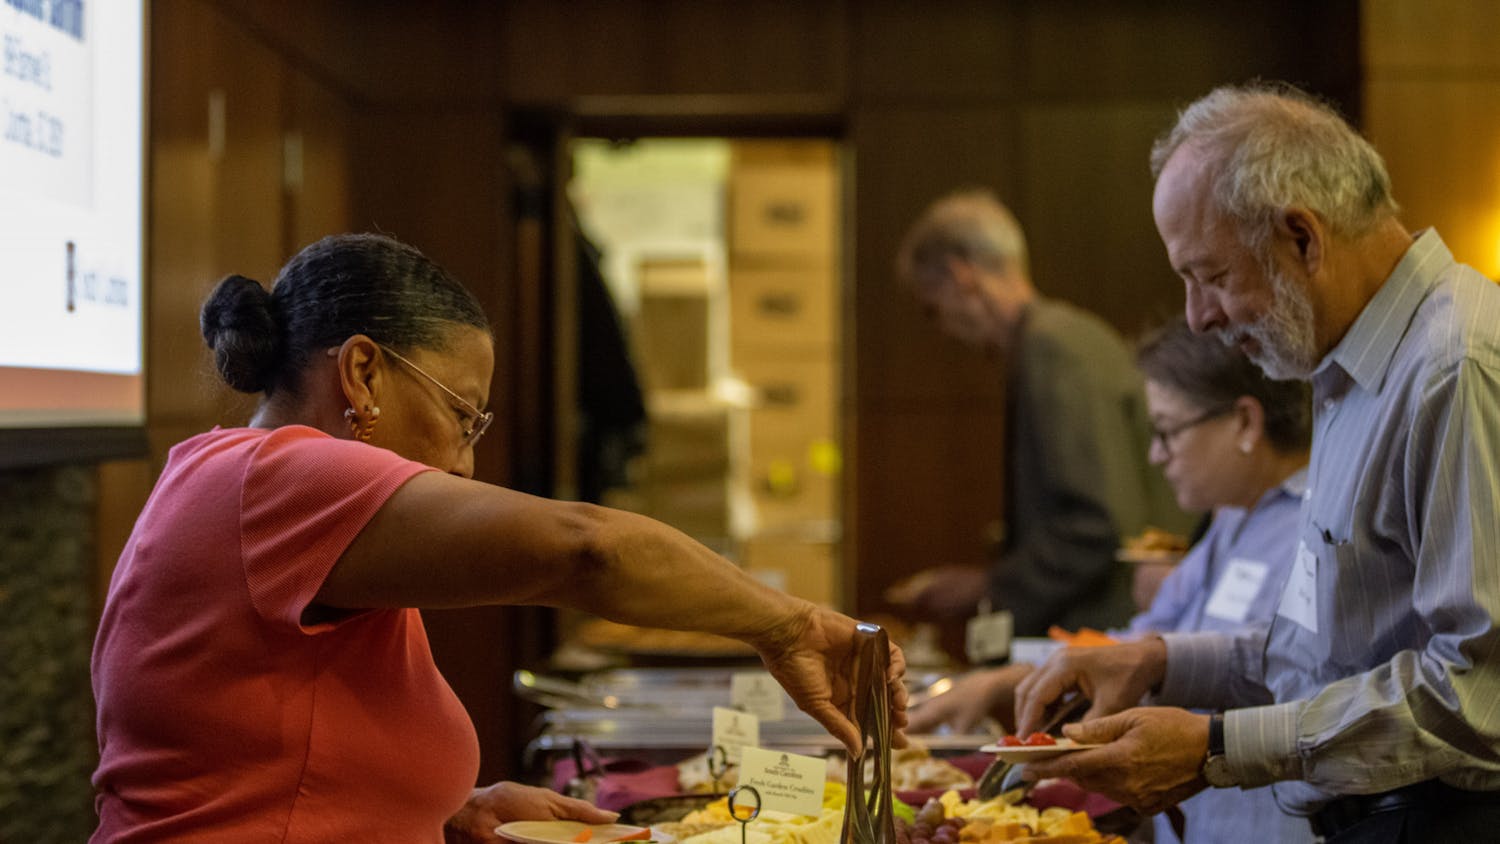 Guests help themselves to refreshments and other items before the screening of The U.S. and The Holocaust on September 14, 2022, in the Capstone Ballroom. The event was brought together by South Carolina ETV and the Anne Frank Center.